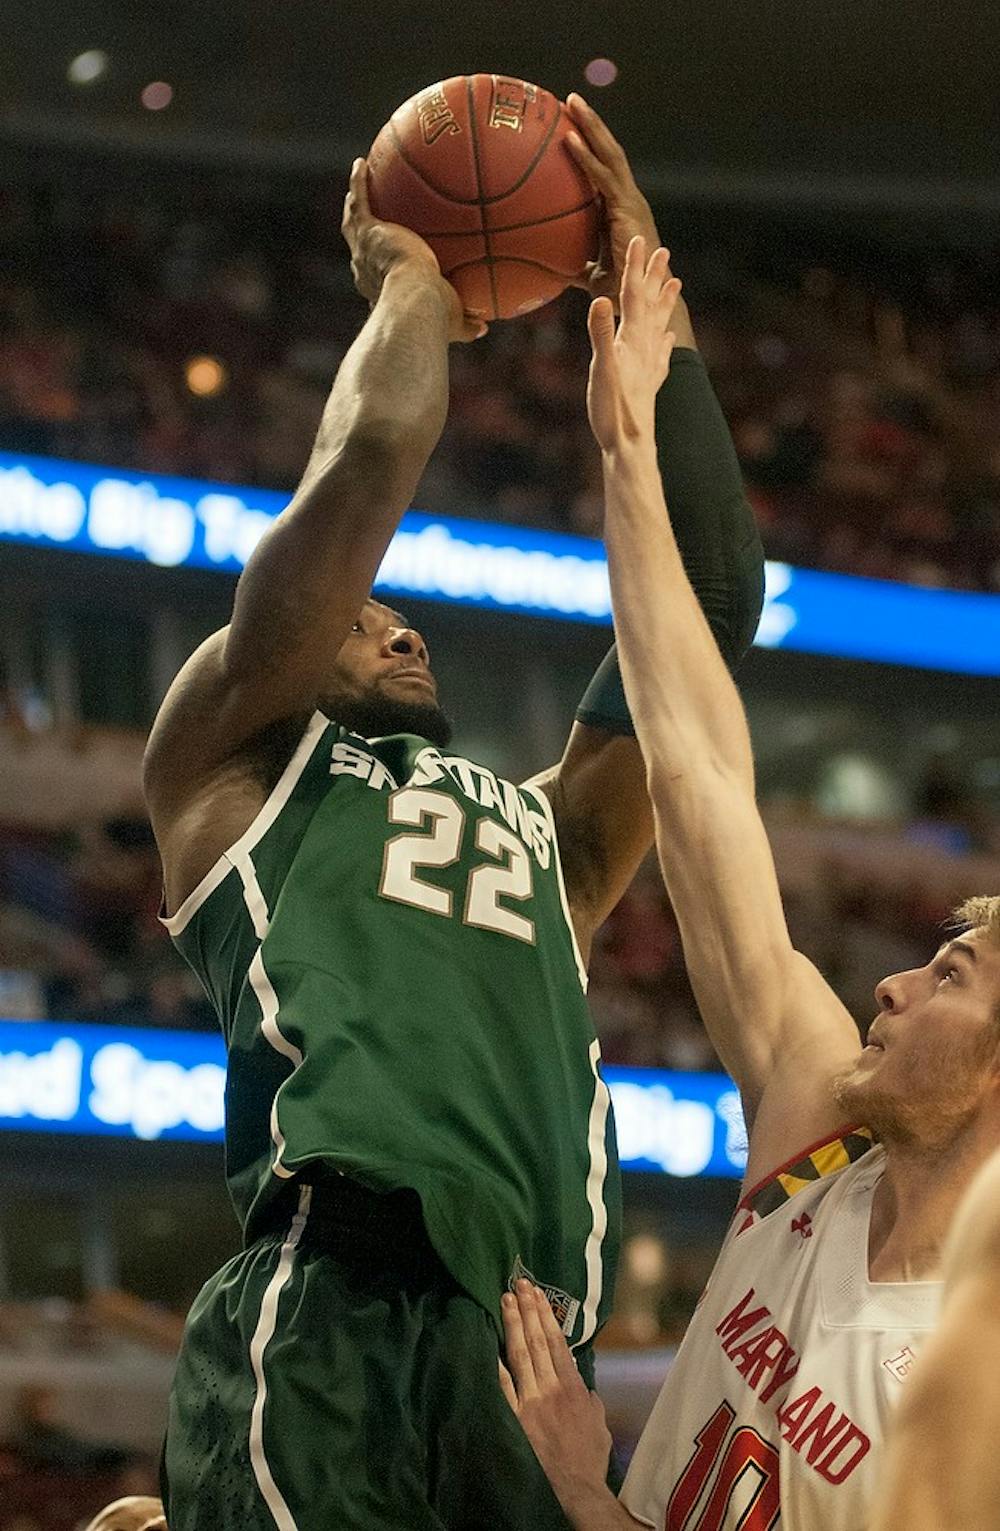 <p>Senior forward/guard Branden Dawson takes a shot over Maryland junior forward Jake Layman Mar. 14, 2015, during the game against Maryland at the Big Ten Tournament at United Center in Chicago. The Spartans defeated the Terrapins, 62-58. Kelsey Feldpausch/The State News</p>